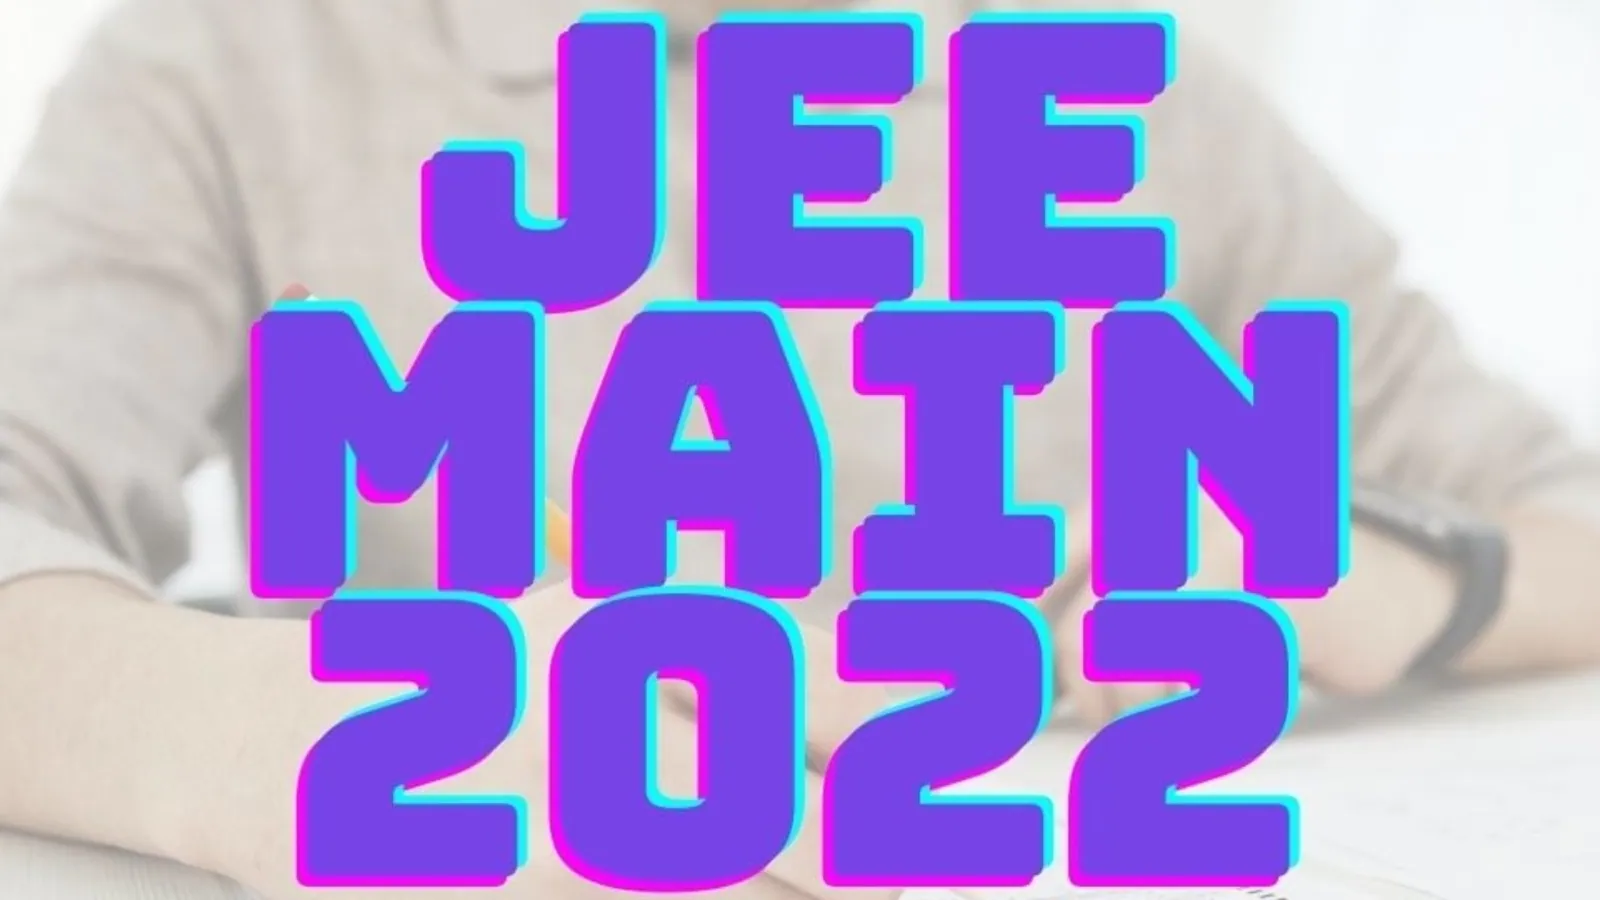 JEE main result 2022: 14 students scored 100 percentile in JEE Main